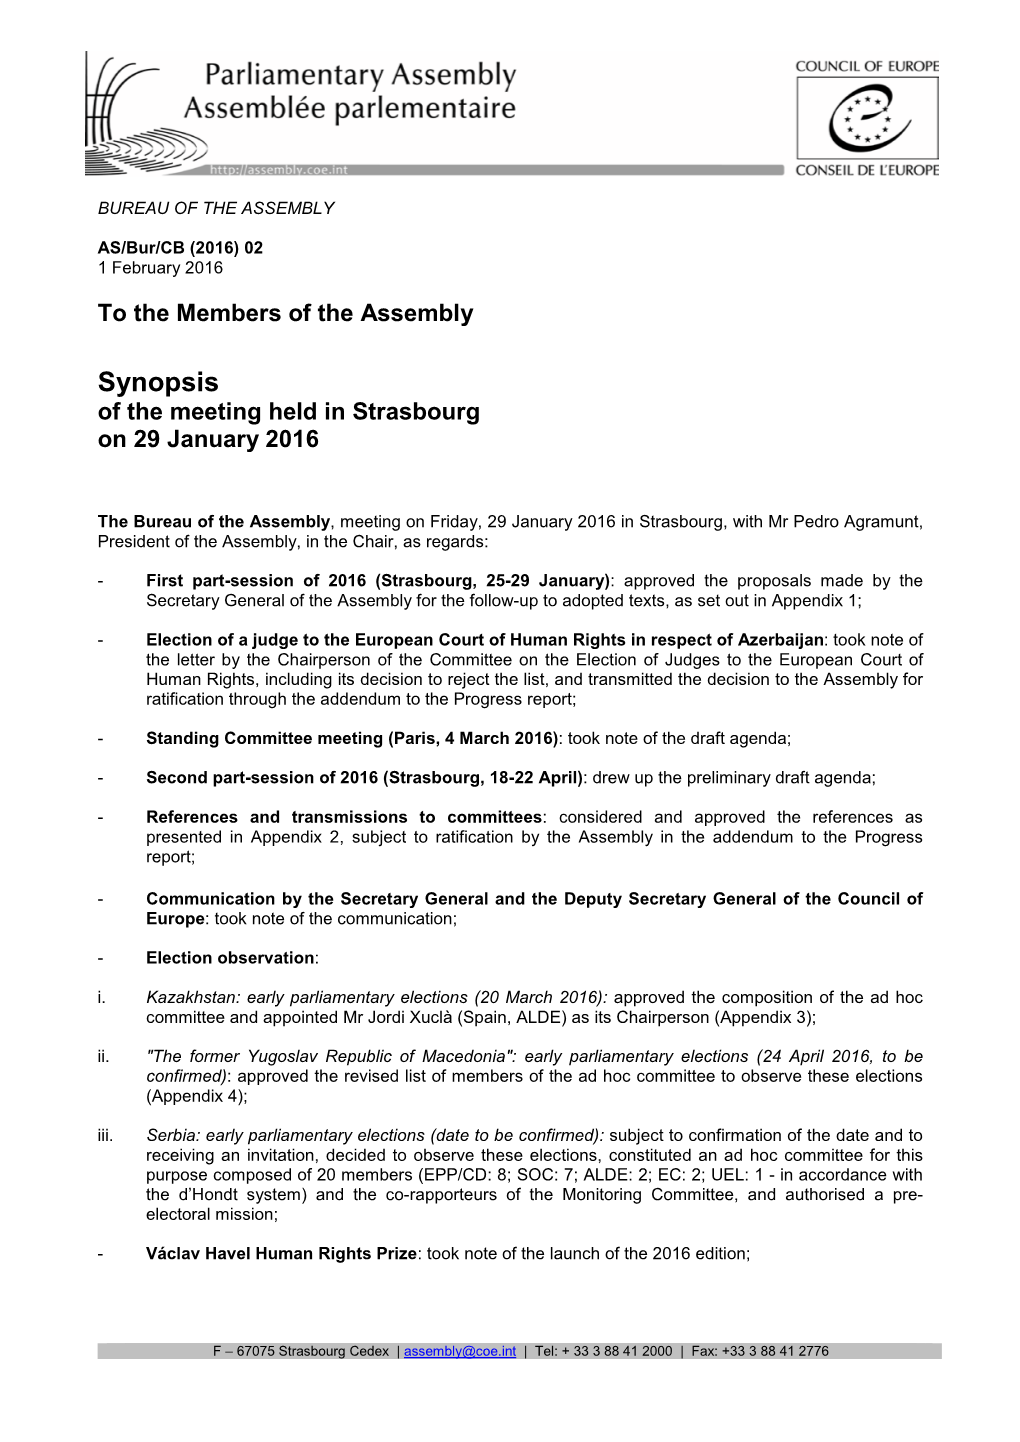 Synopsis of the Meeting Held in Strasbourg on 29 January 2016